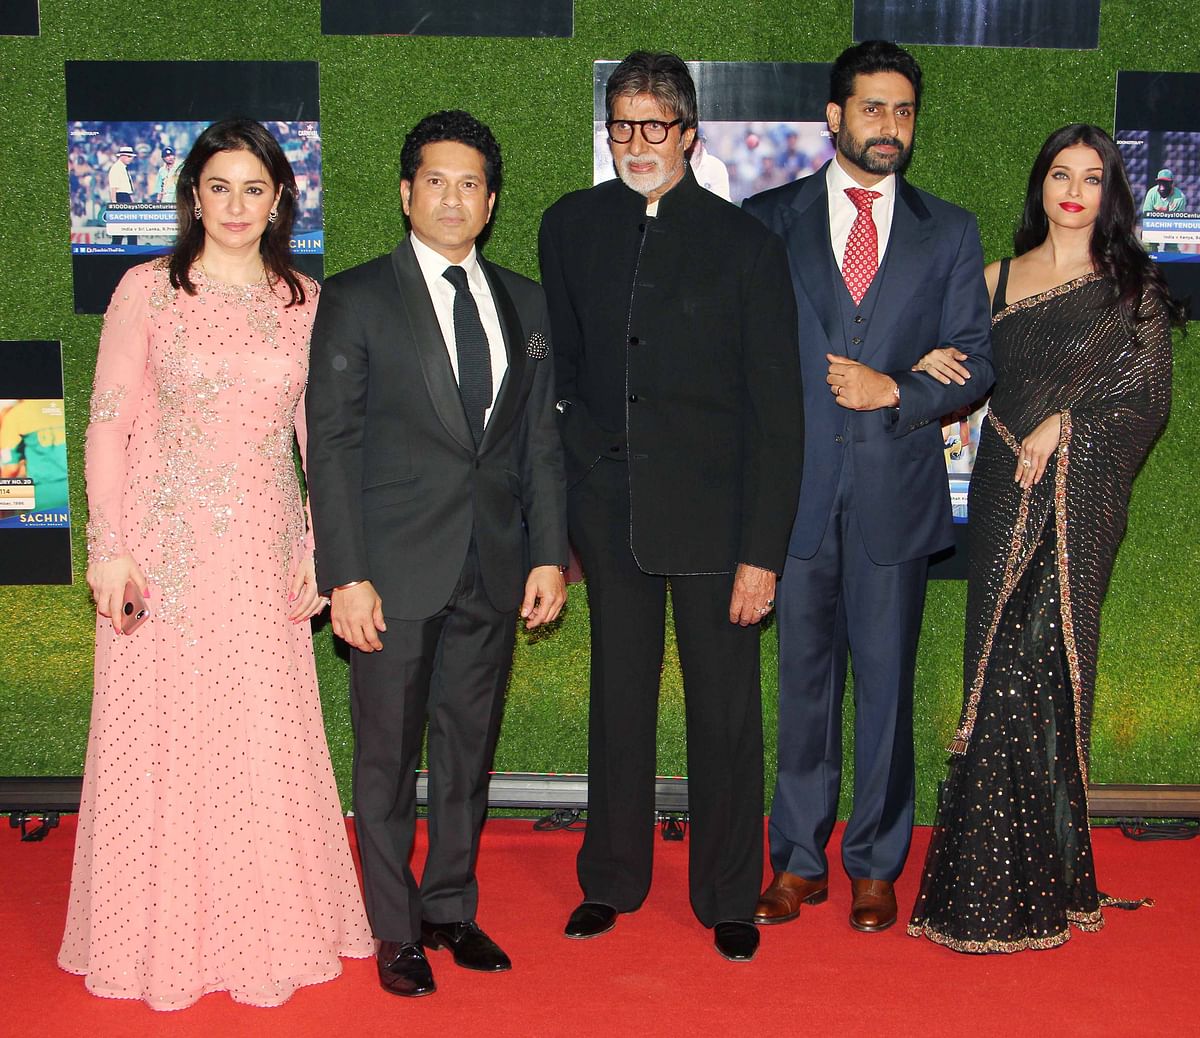 From Shah Rukh Khan to Pahlaj Nihalani - the who’s who of Bollywood were at the ‘Sachin’ premiere.